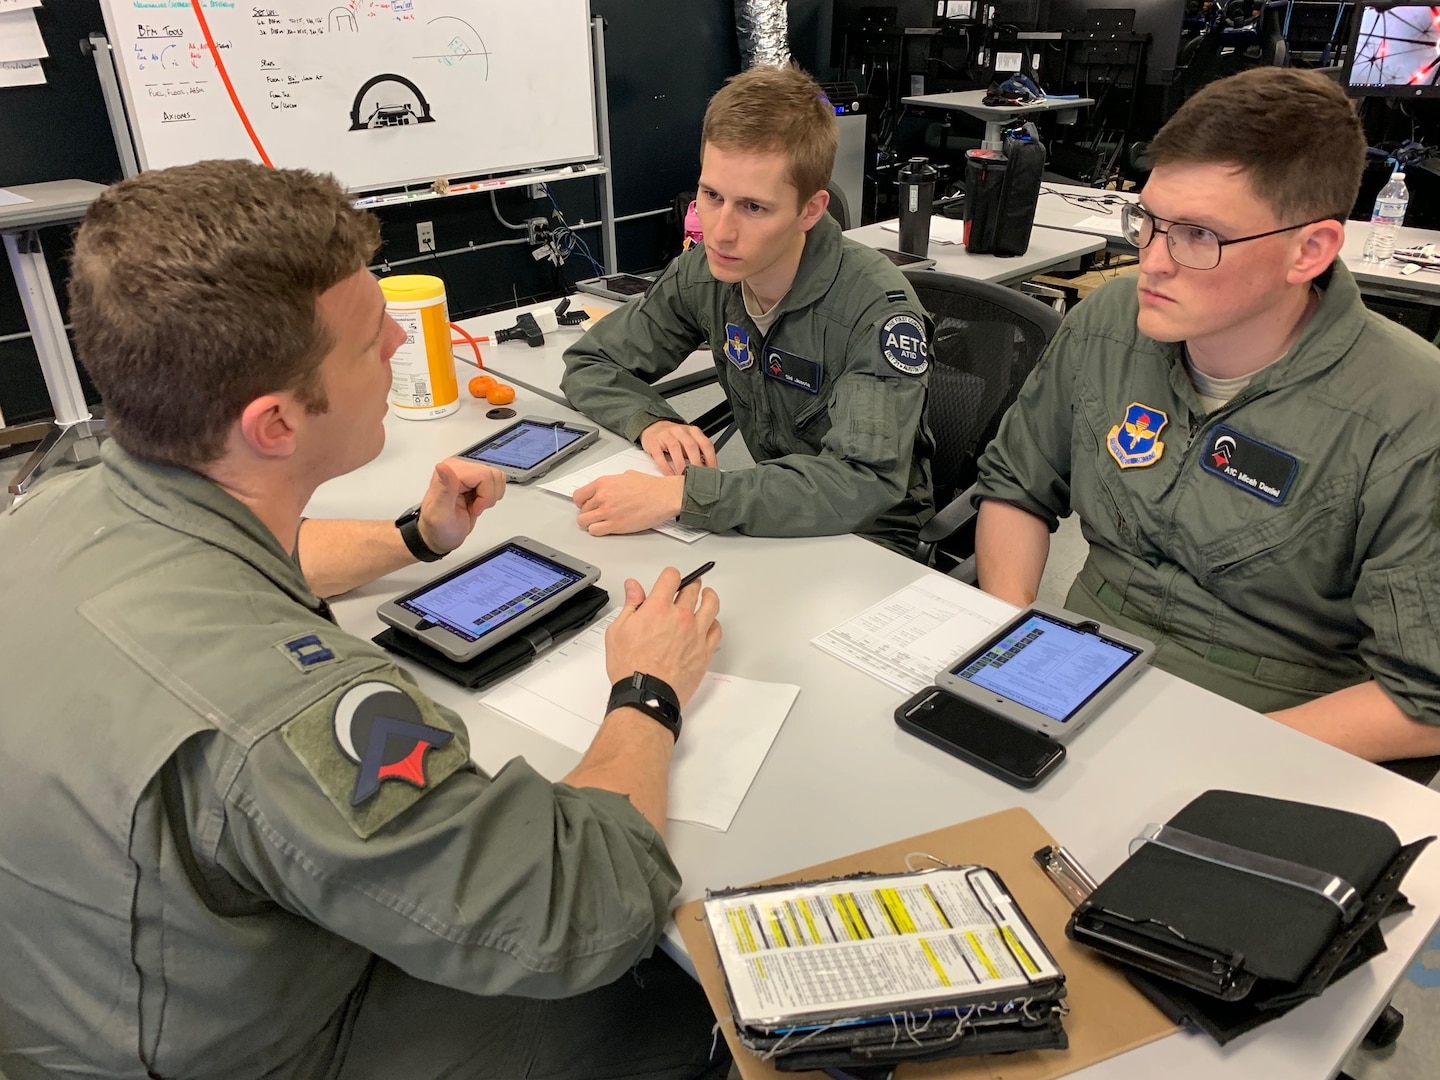 U.S. Air Force Capt. Jonathan Leetch, Pilot Training Next instructor pilot, debriefs students Royal Air Force Flight Officer Syd Janota (center), and Airman 1st Class Micah Daniel, after a virtual-reality training sortie at the PTN facility at the Armed Forces Reserve Center in Austin, Texas, March 18, 2019. The RAF is participating in PTN's second iteration in an effort to accelerate learning and increase pilot production.